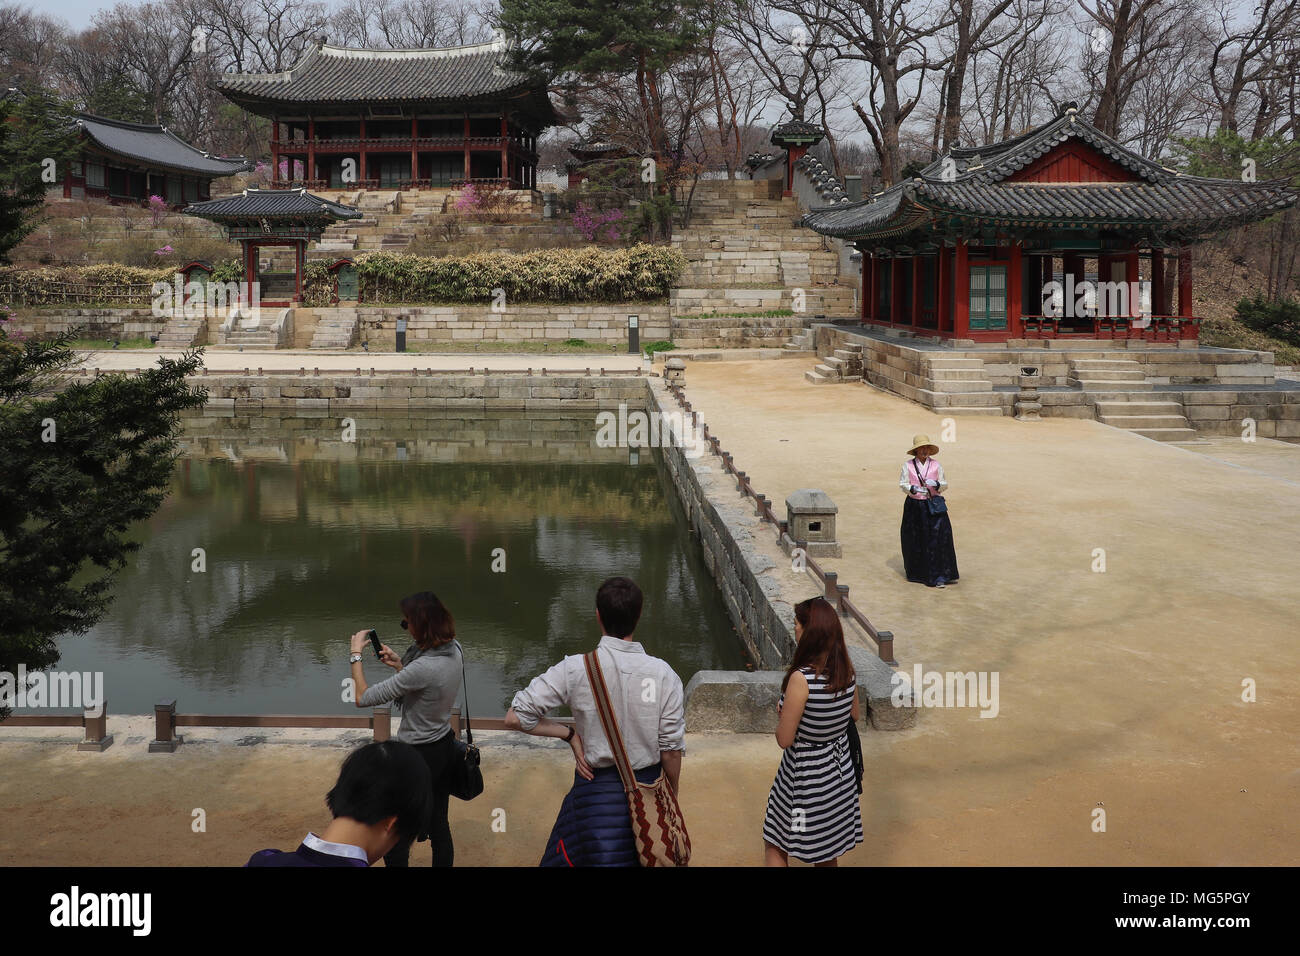 Looking across the Buyongji Pond to the Juhamnu Pavilion on the hill, and the Yeongyeongdang Hall at right in the Huwon at Changdeokgung Palace, Seoul Stock Photo